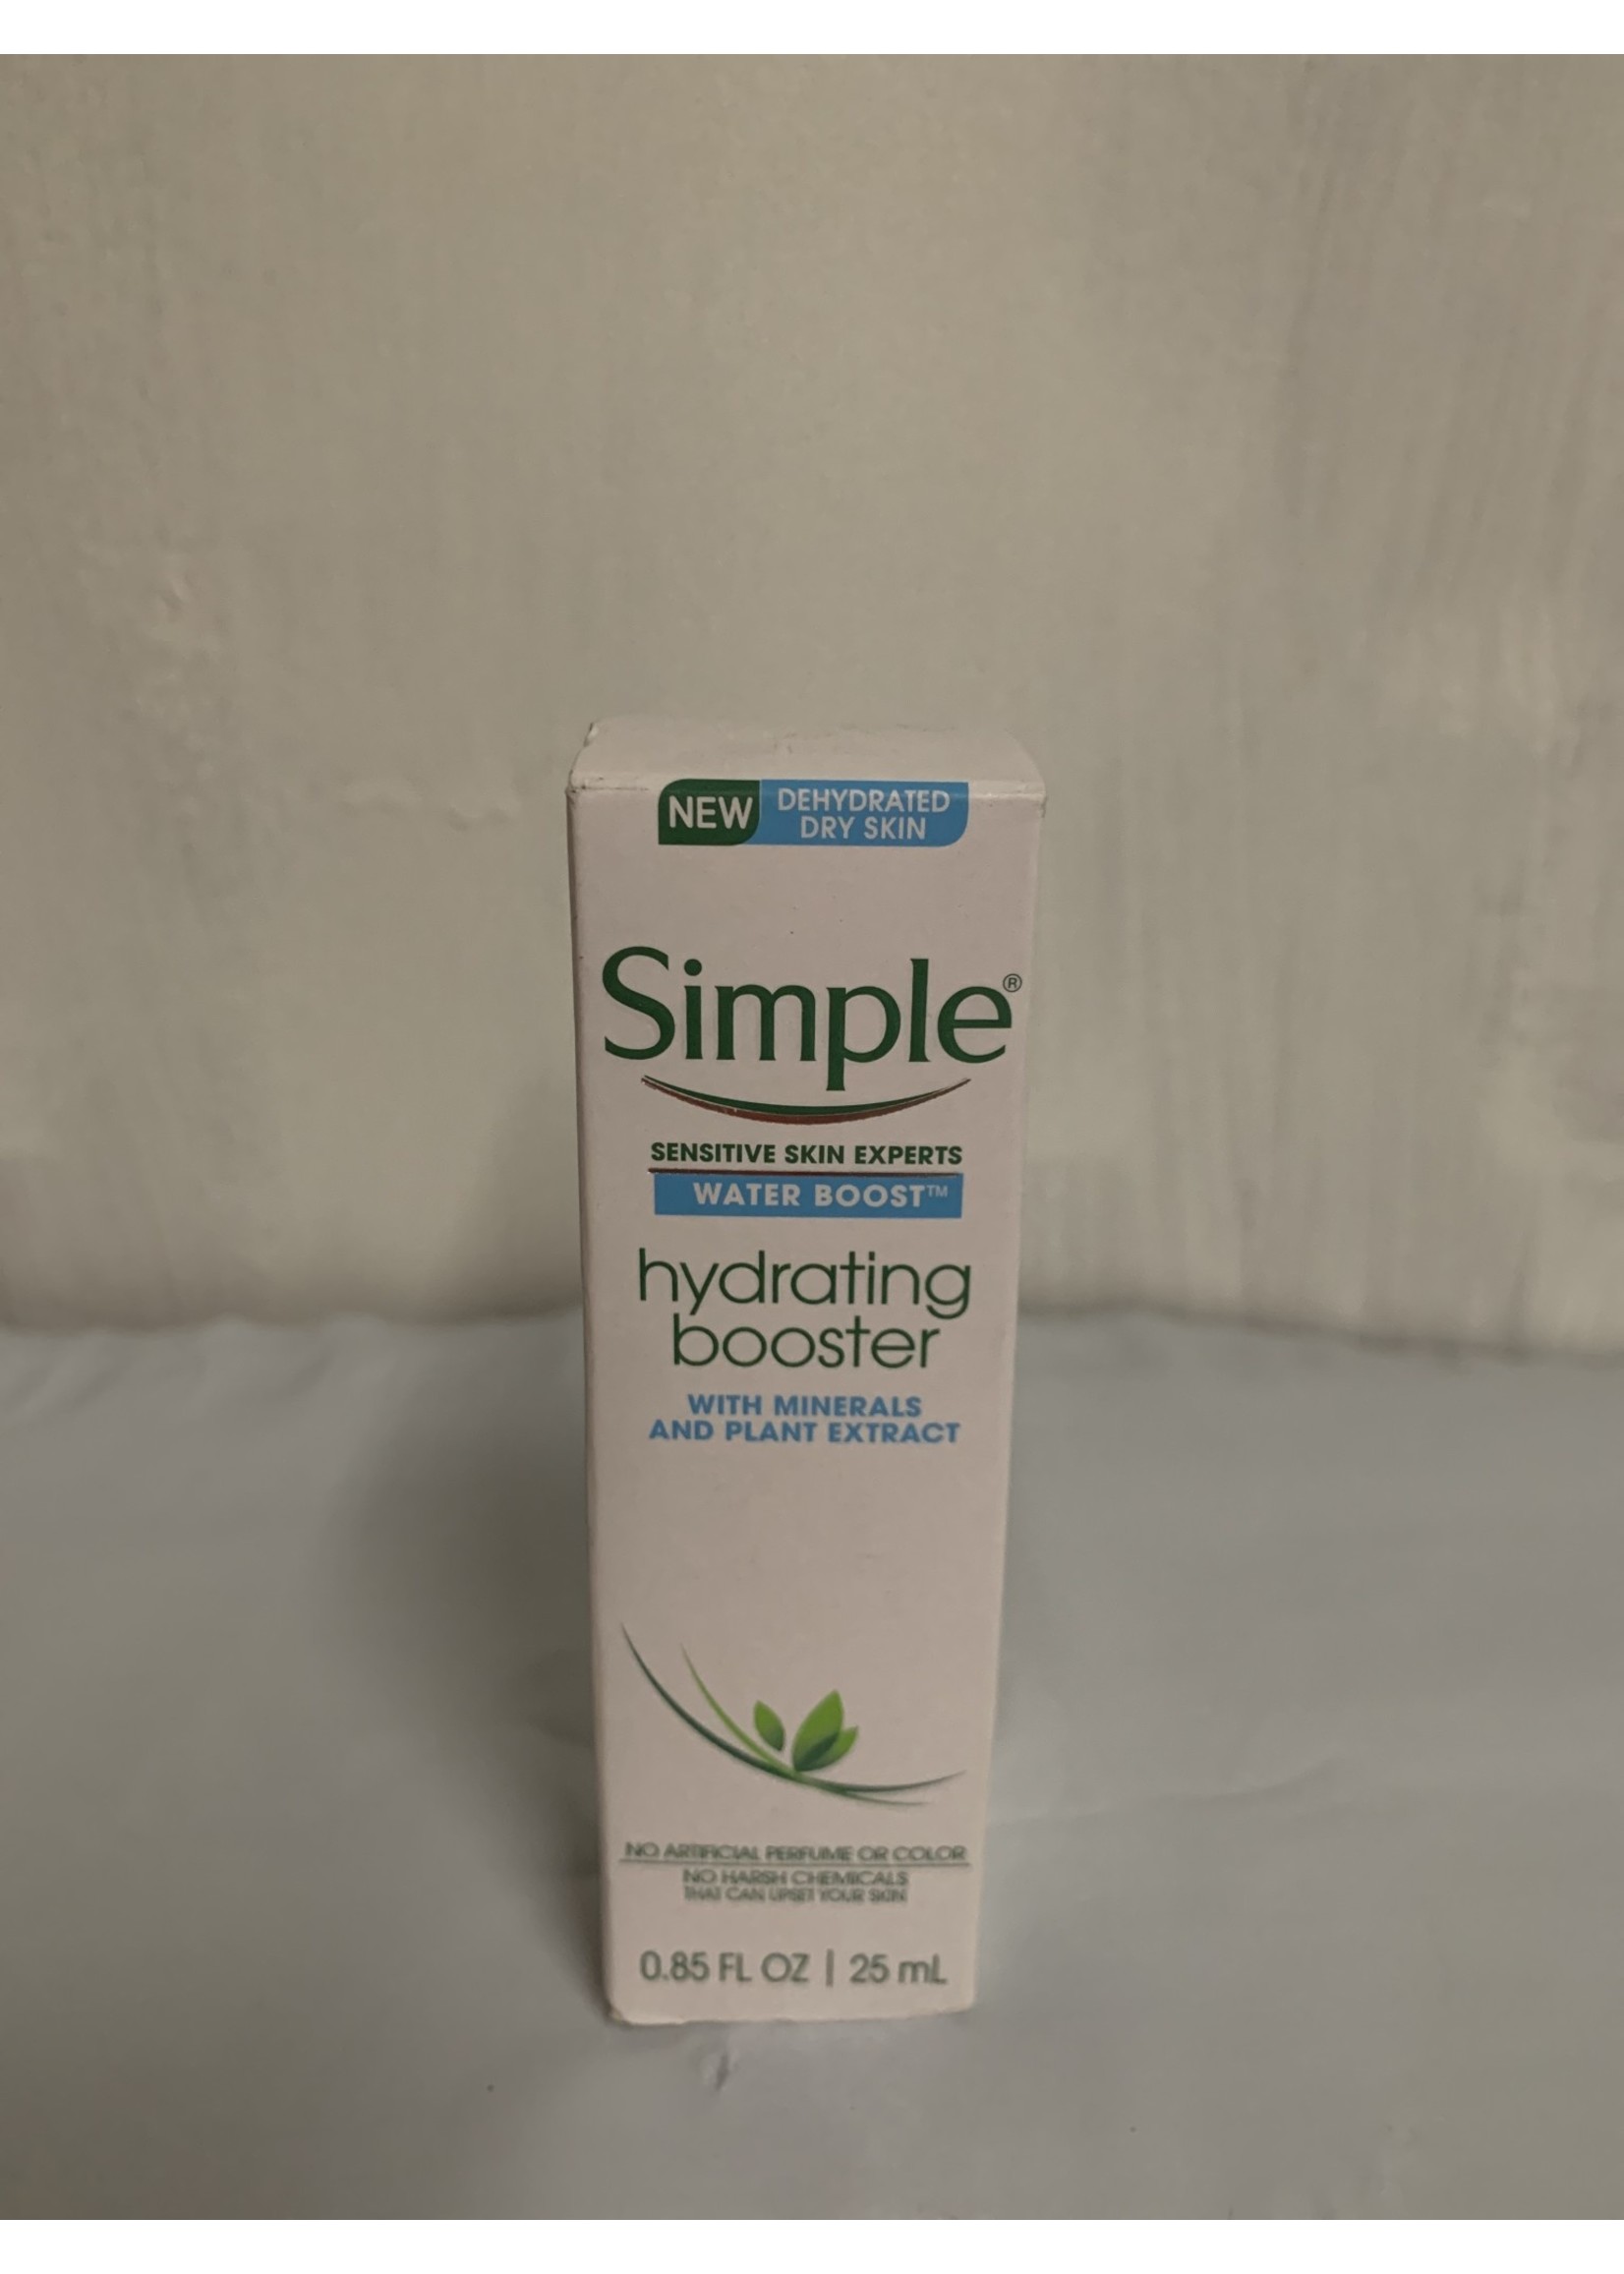 Simple Hydrating Booster with Minerals and Plant Extract, Water Boost